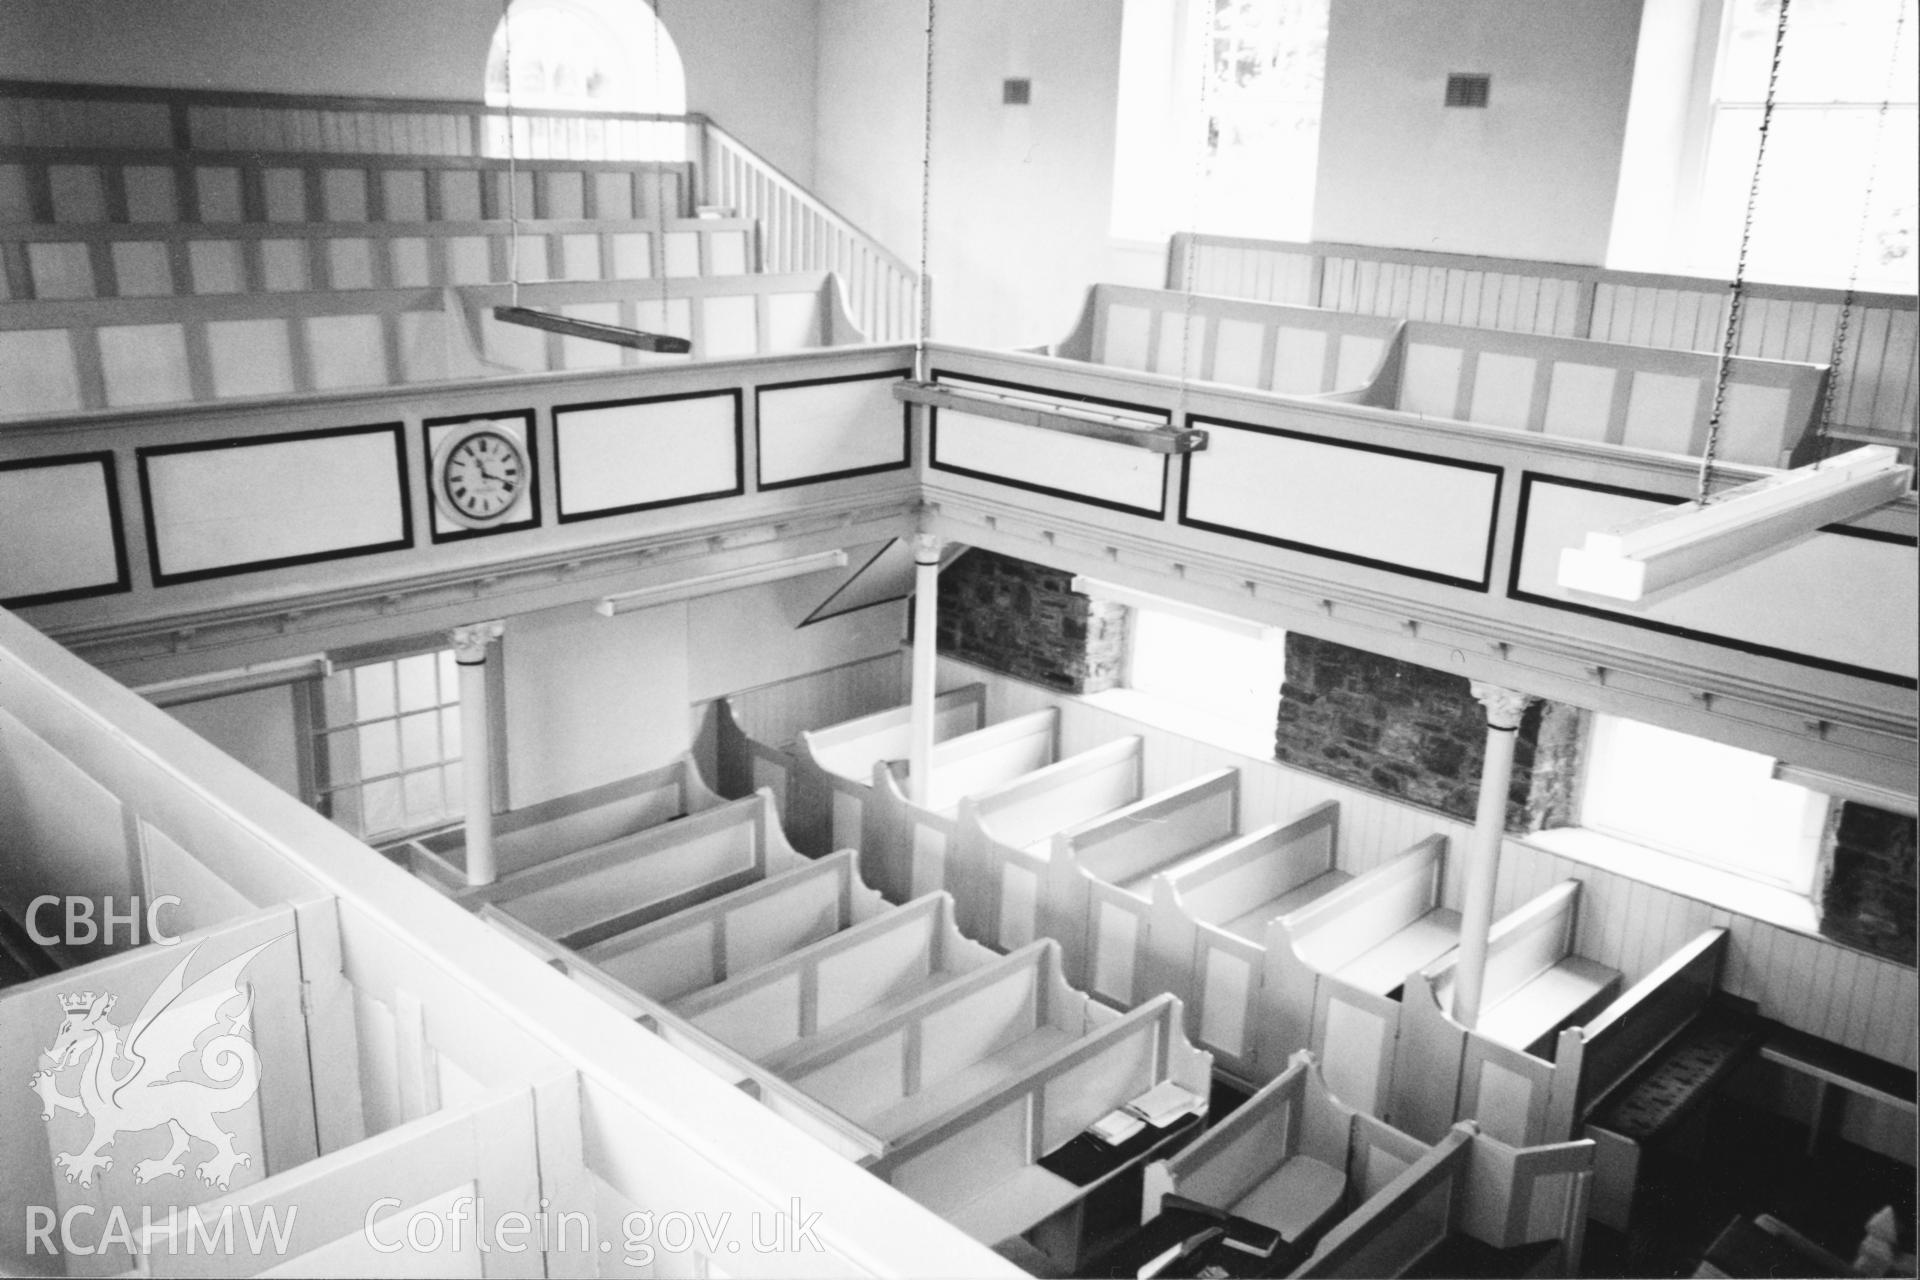 Digital copy of a black and white photograph showing an interior view of Rhydyceisiad Welsh Independent Chapel,  taken by Robert Scourfield, 1996.